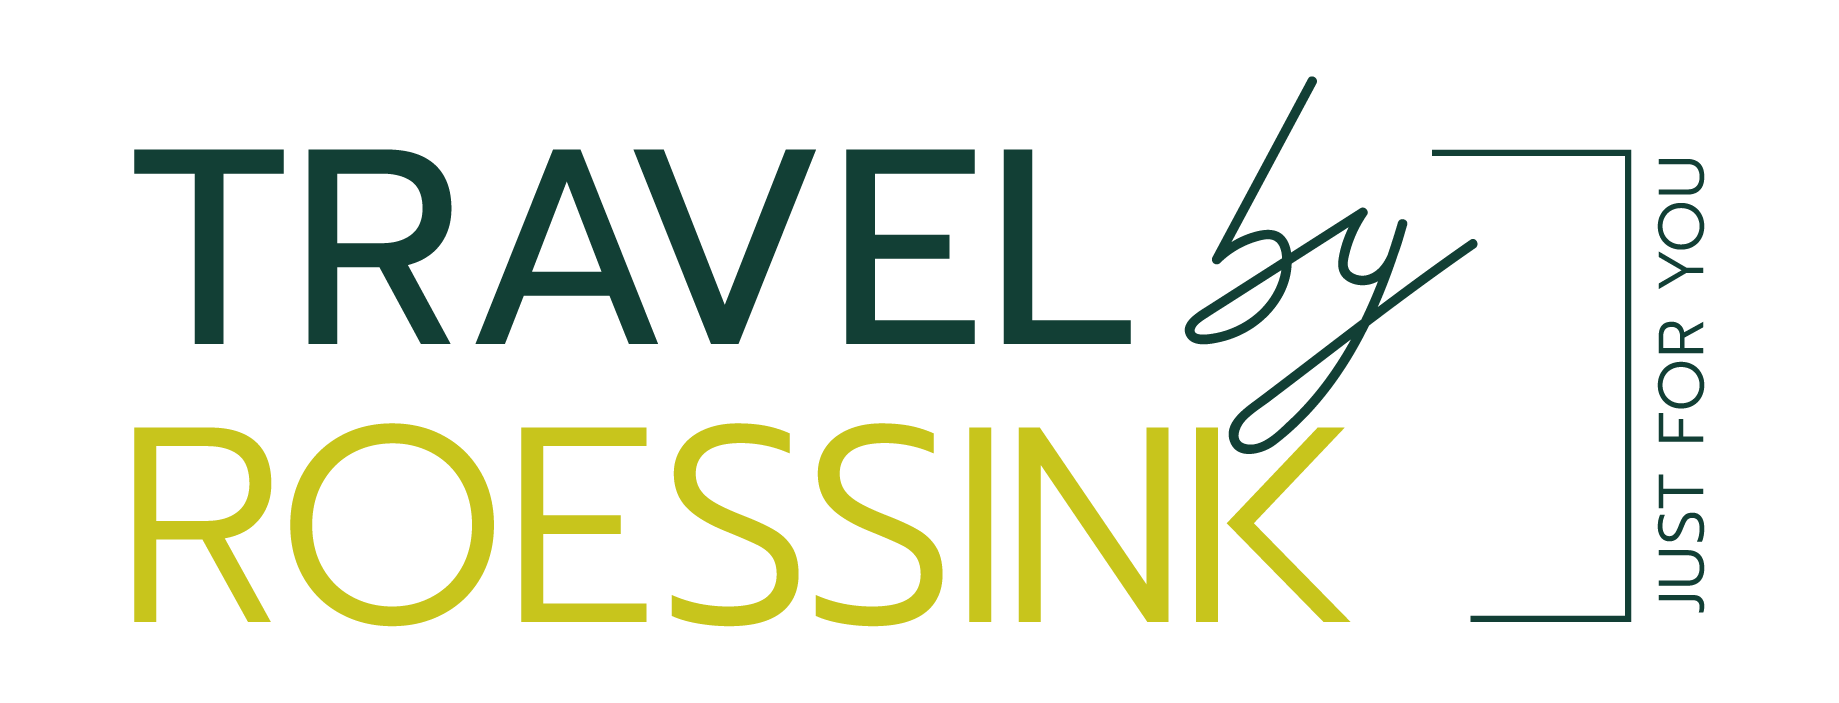 Travel By Roessink